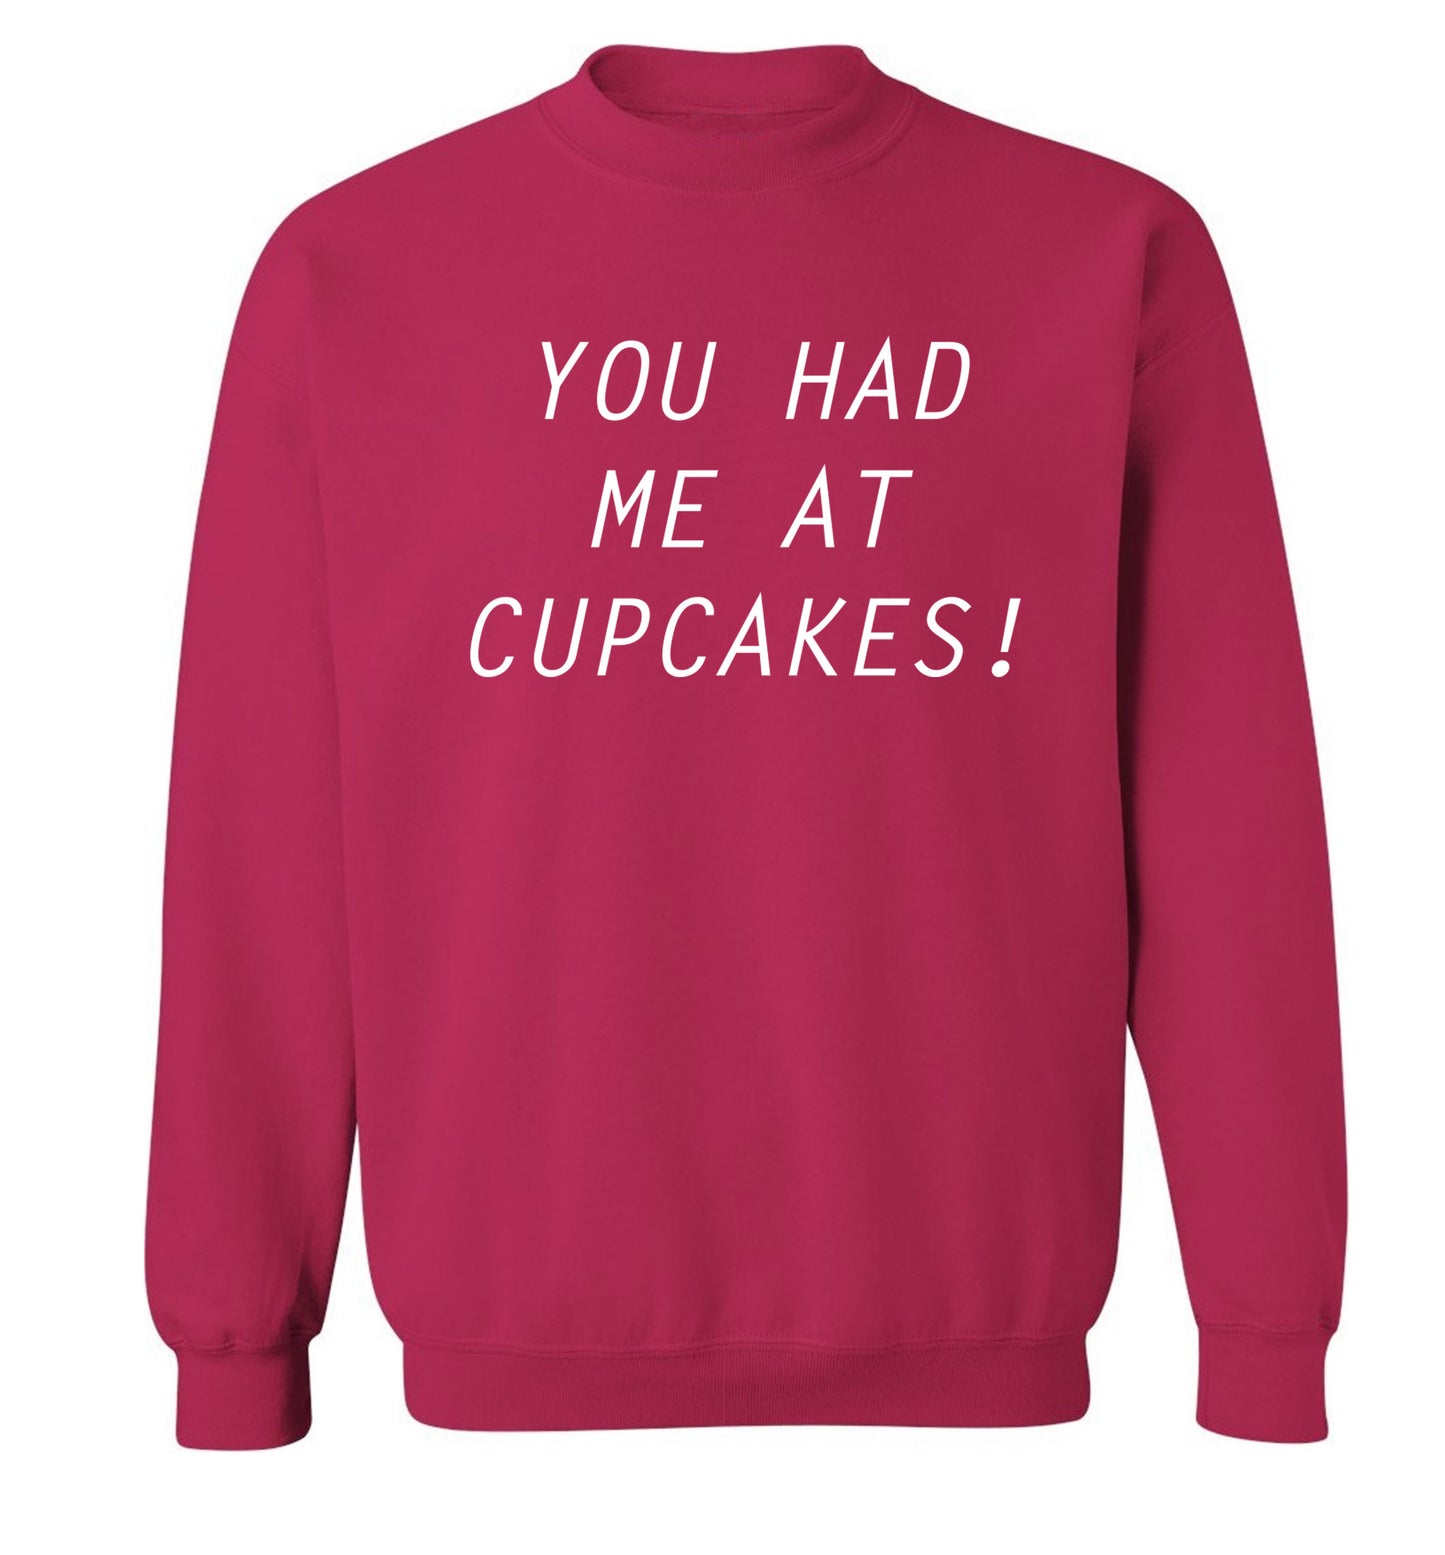 You had me at cupcakes Adult's unisex pink Sweater 2XL